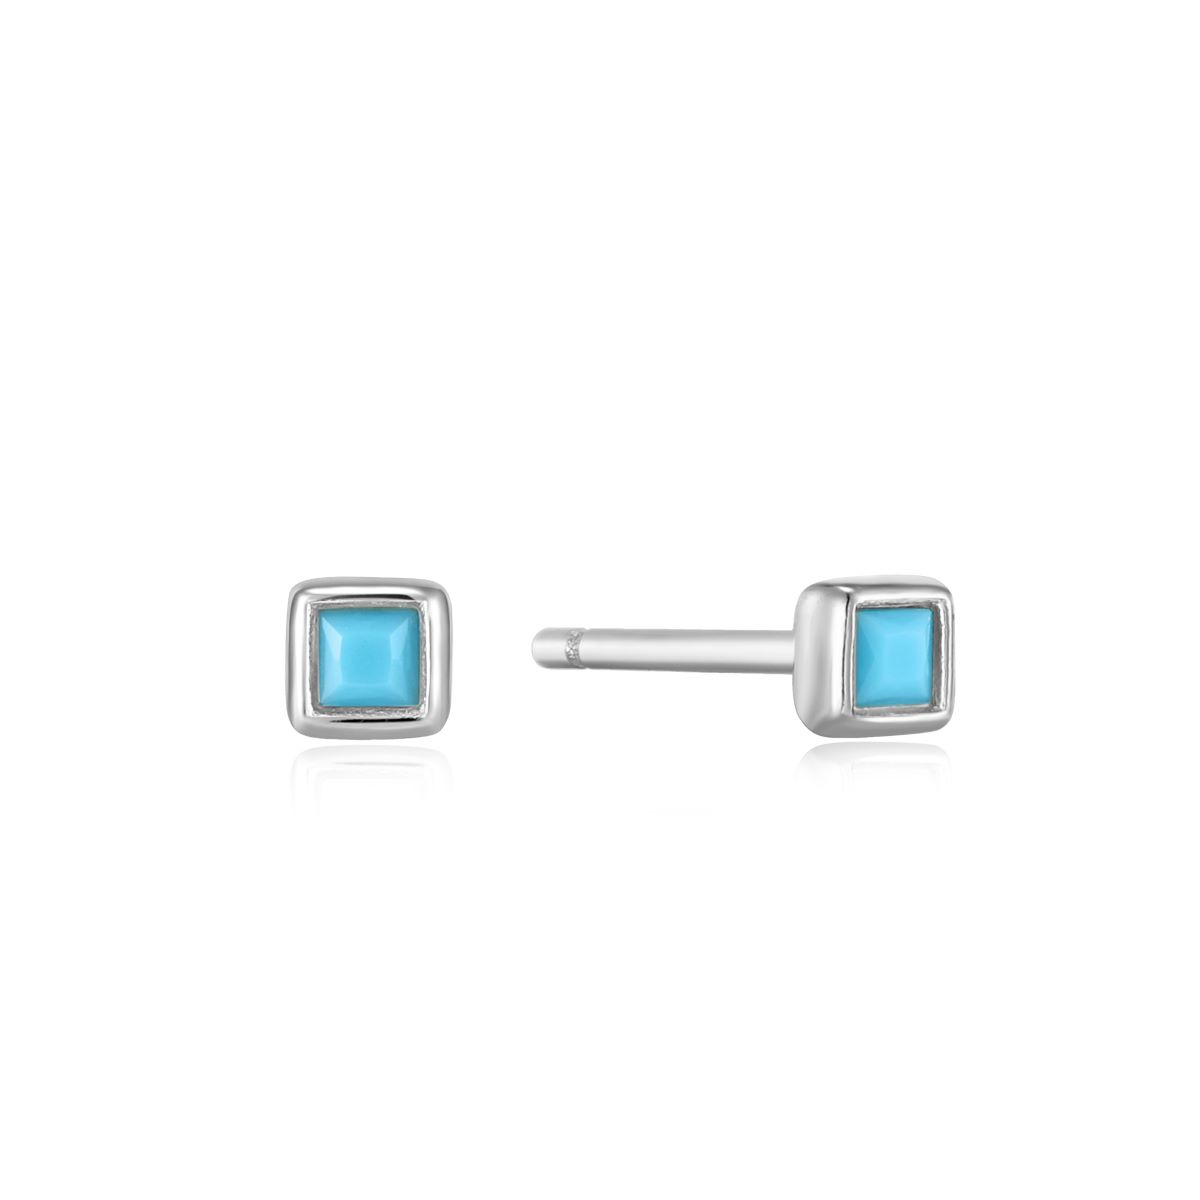 Ania Haie Turquoise Square Stud Earrings -  Silver - E033-01H